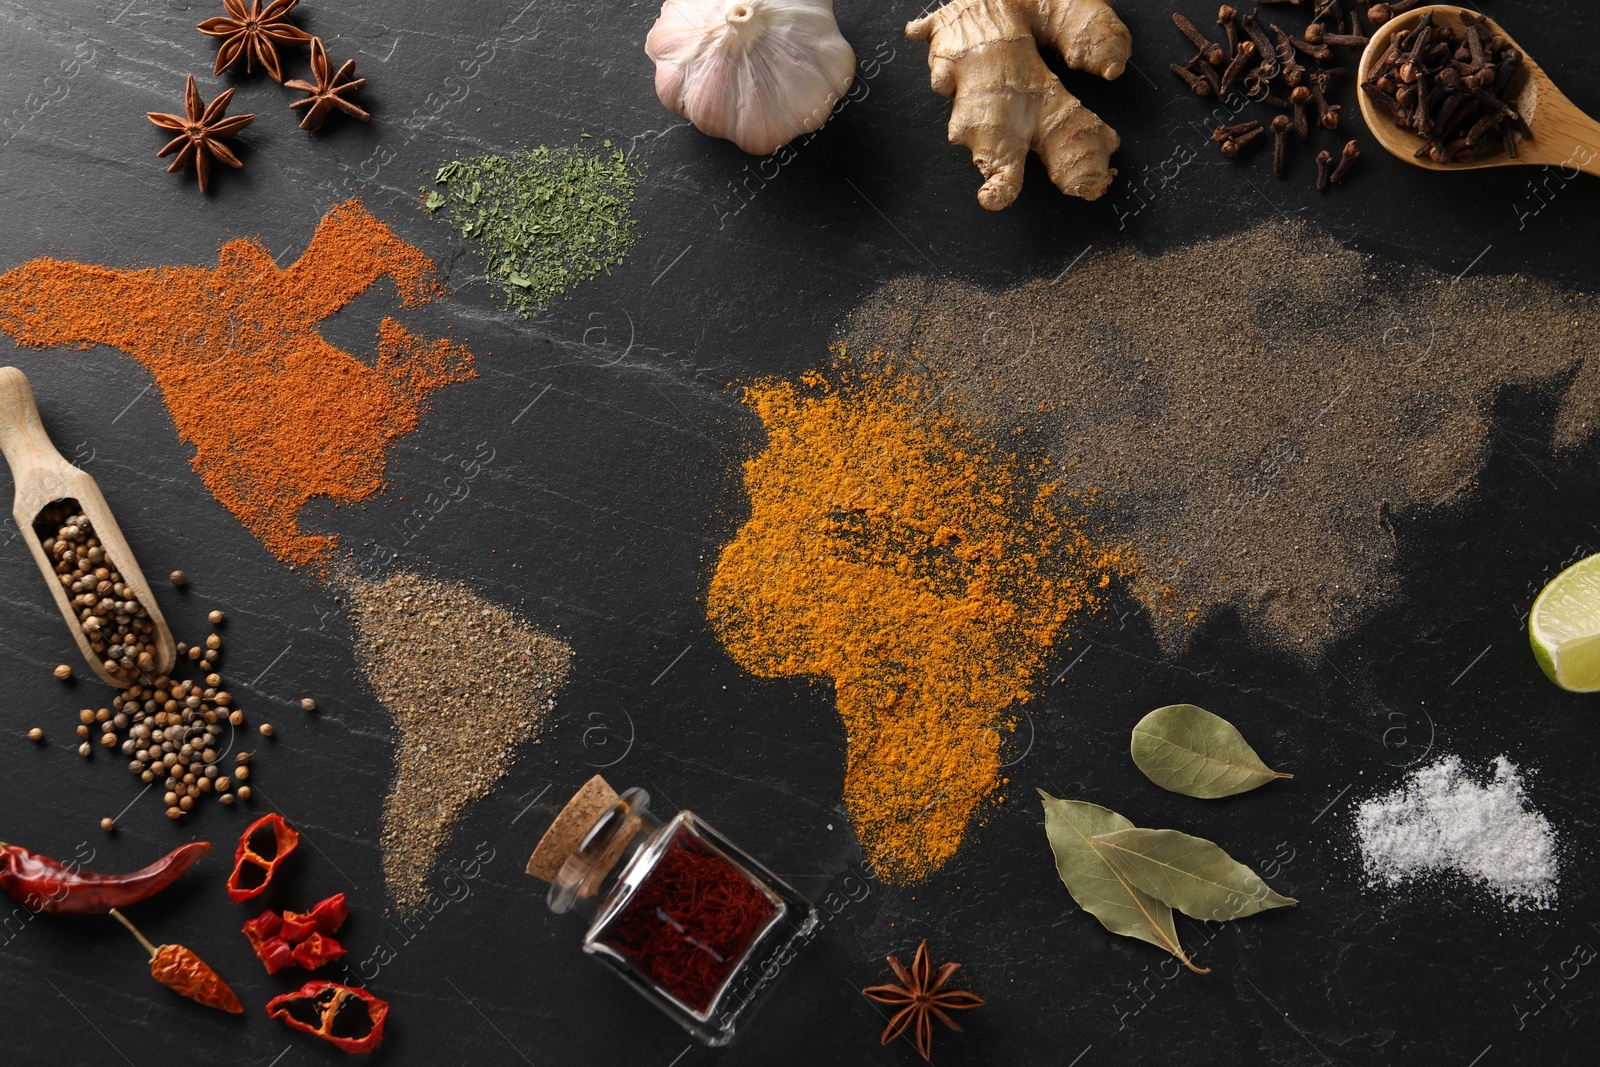 Photo of World map of different spices and products on dark textured table, flat lay